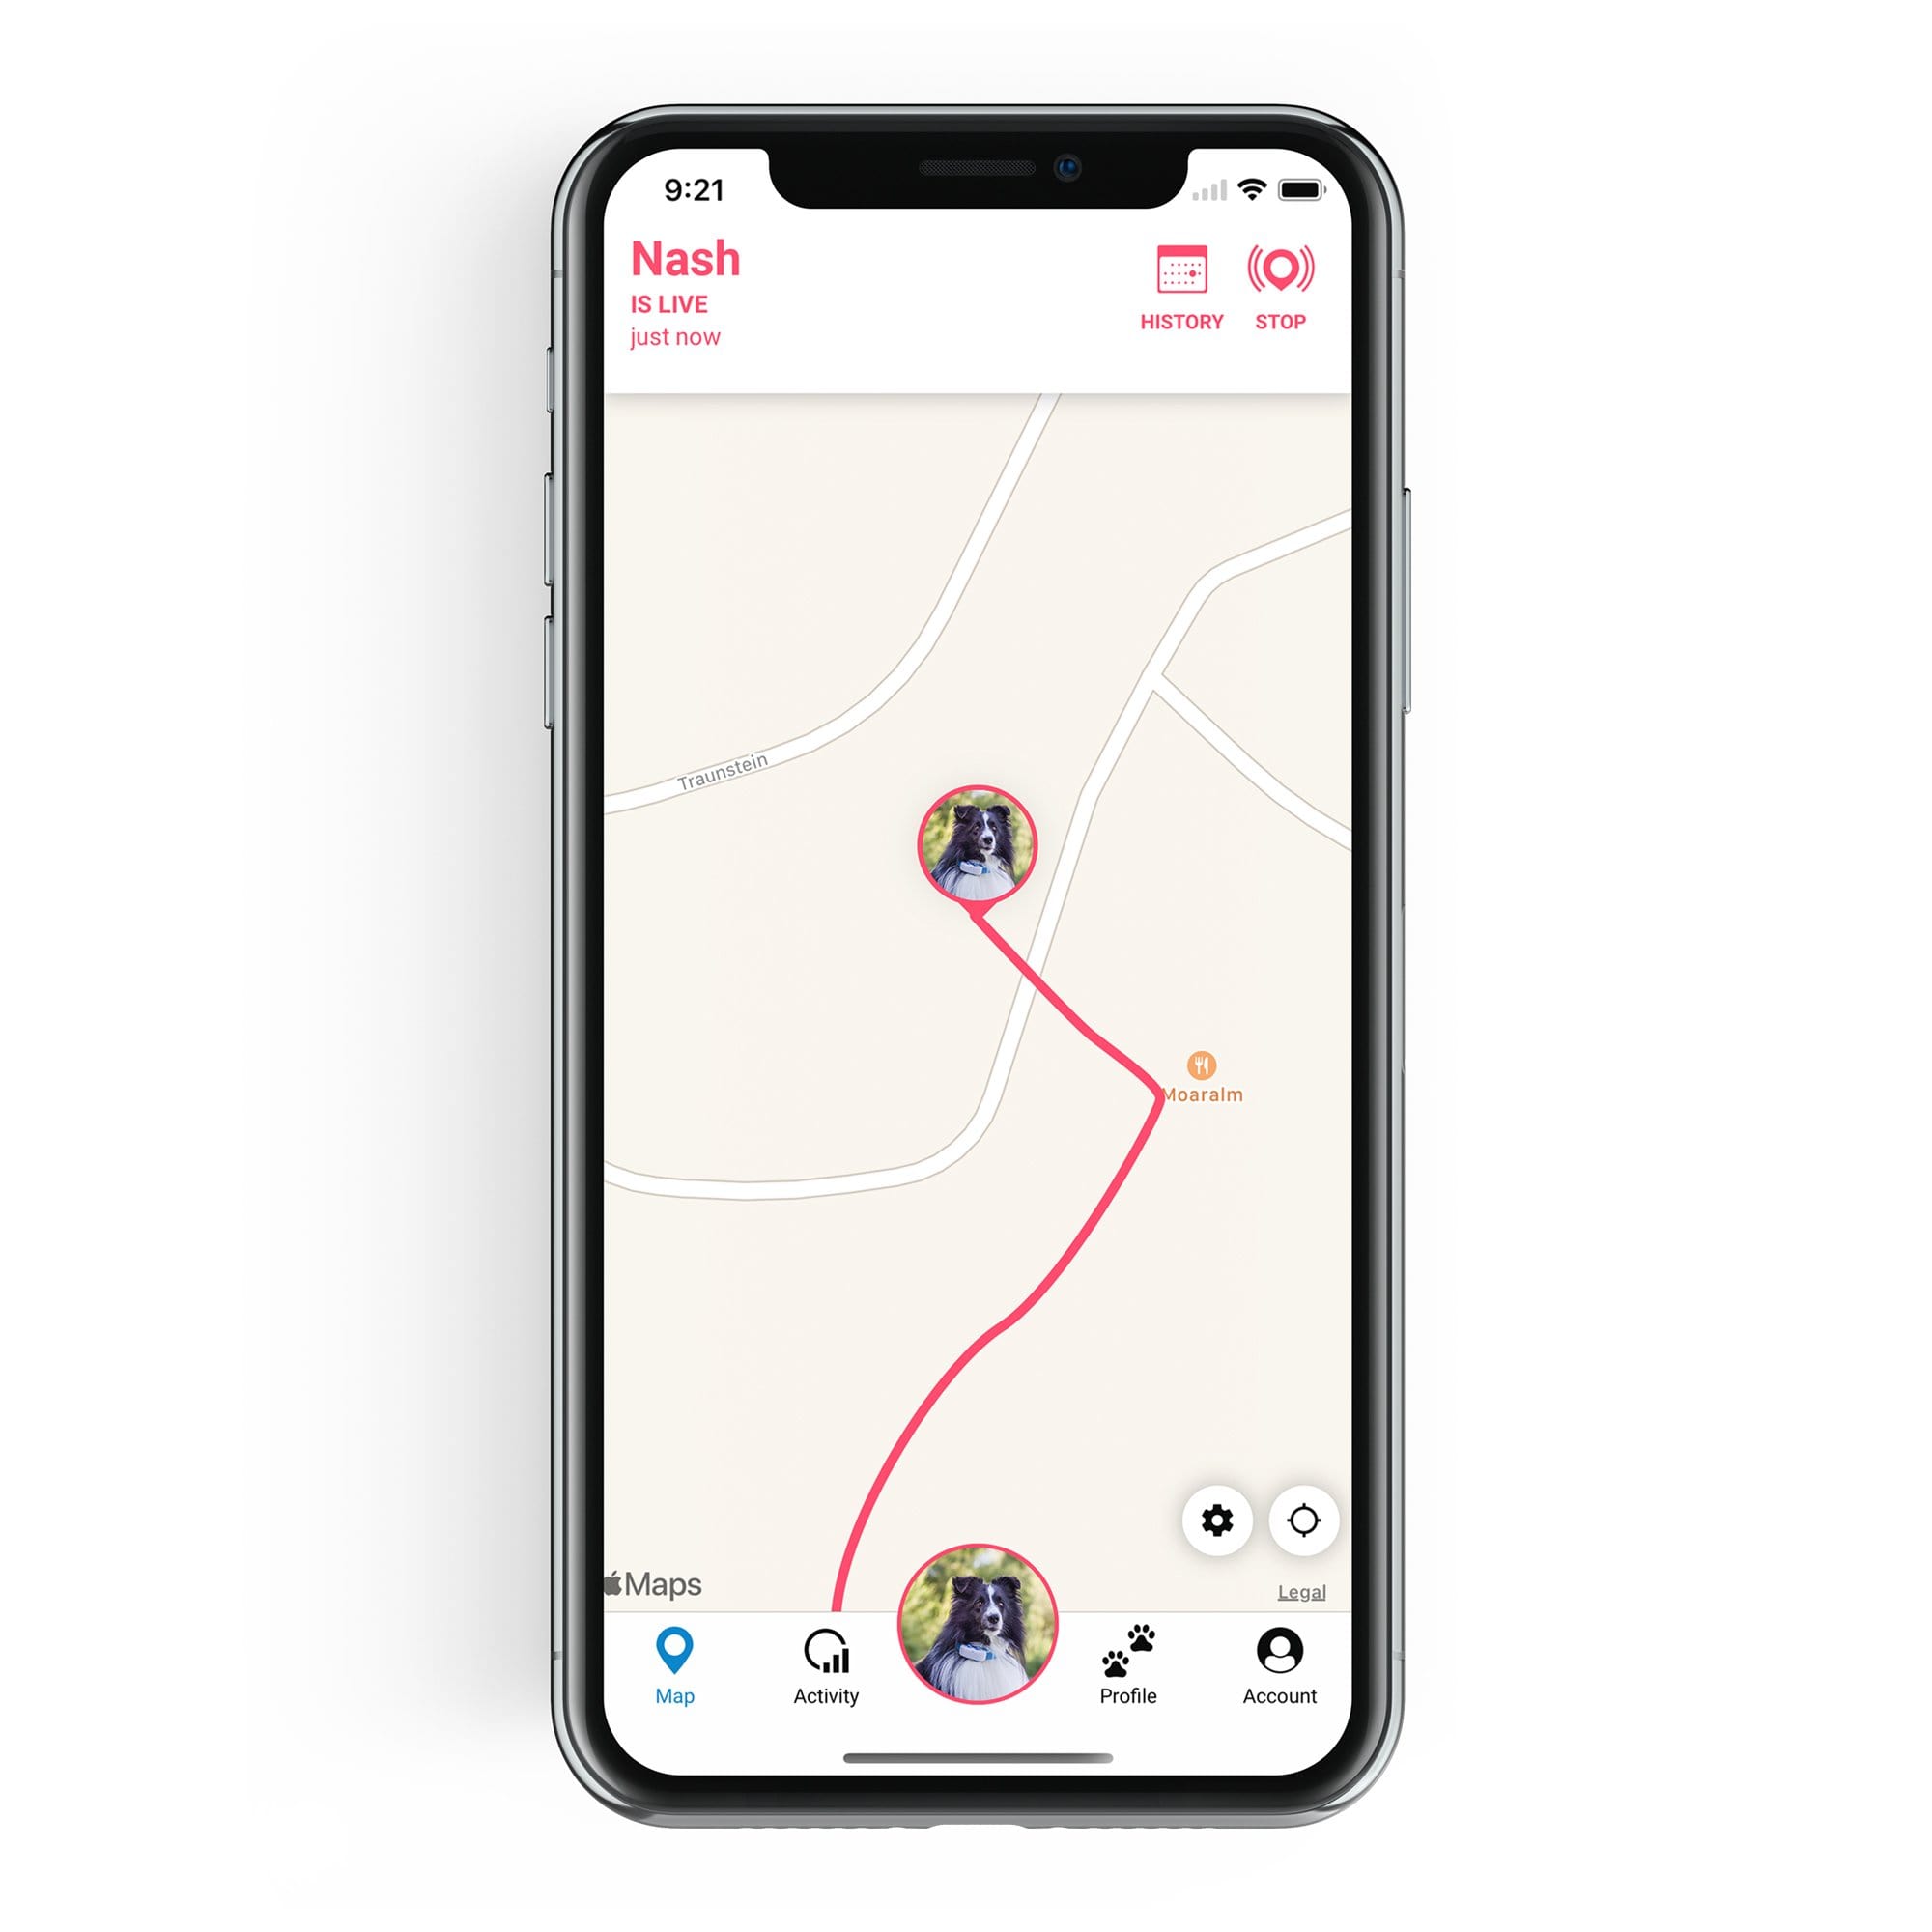 The Tractive GPS app is shown in this image in live mode.